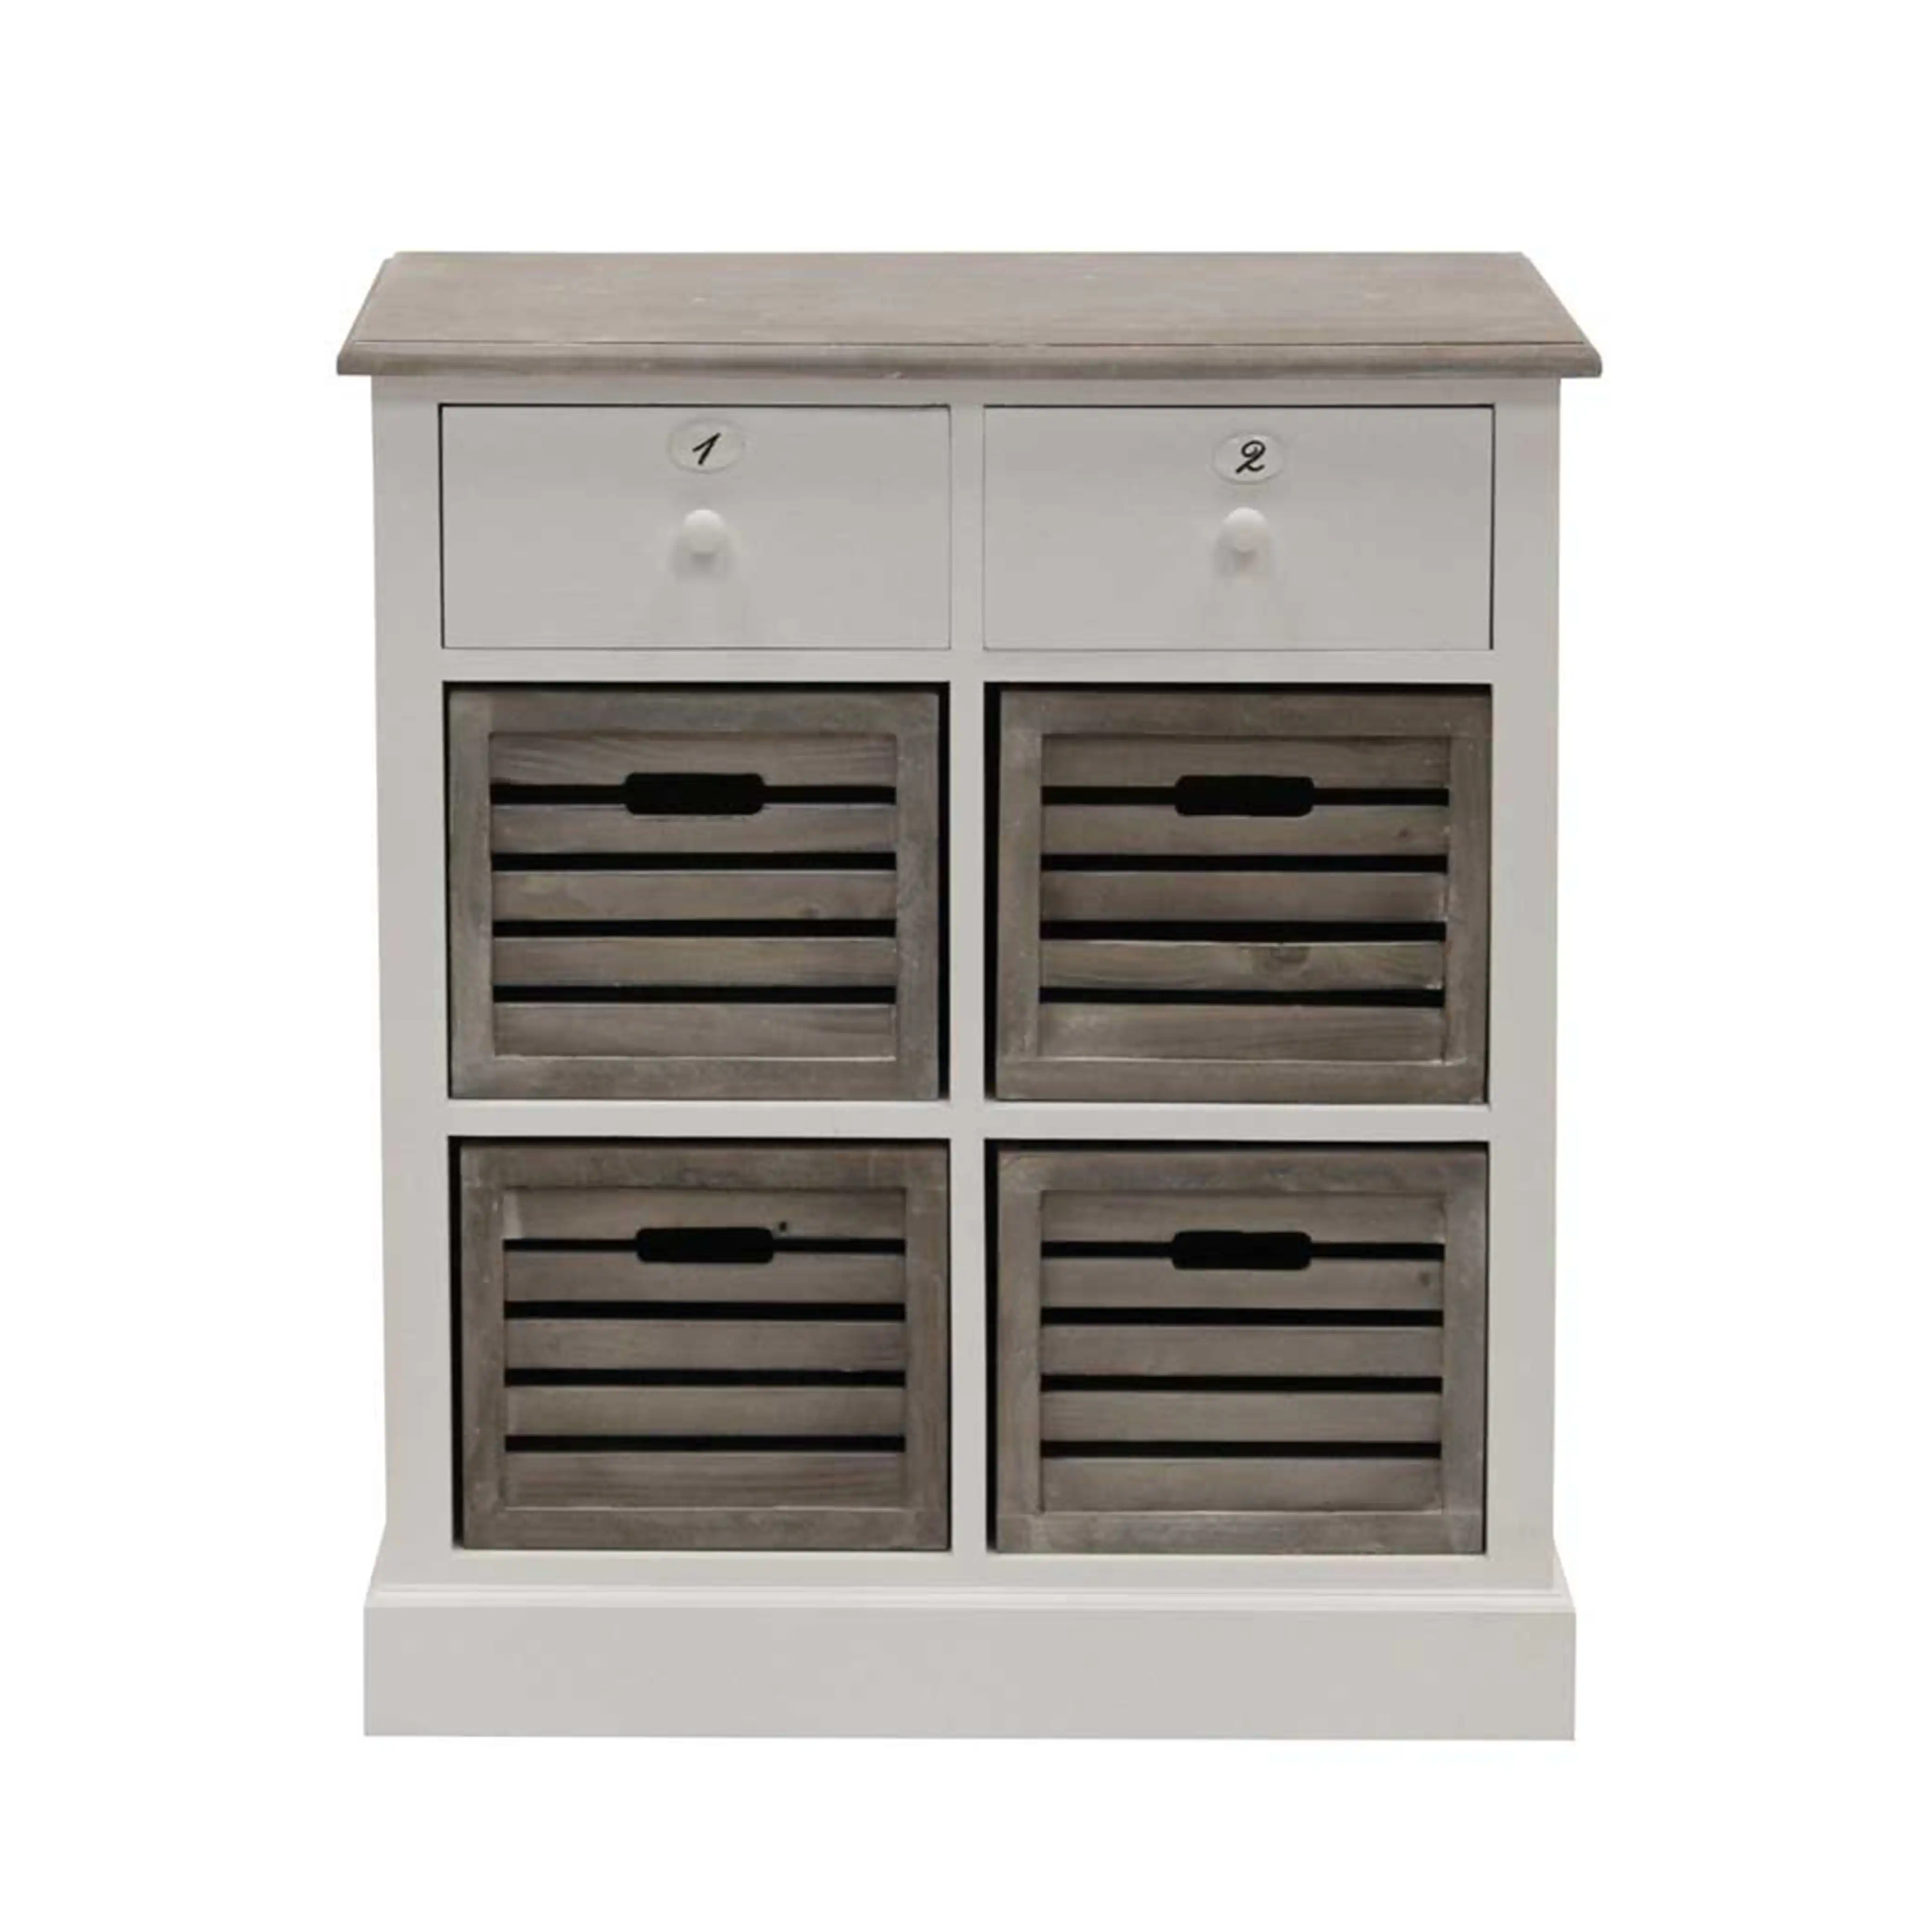 Cabinet with 2 drawers & 4 baskets - popular handicrafts